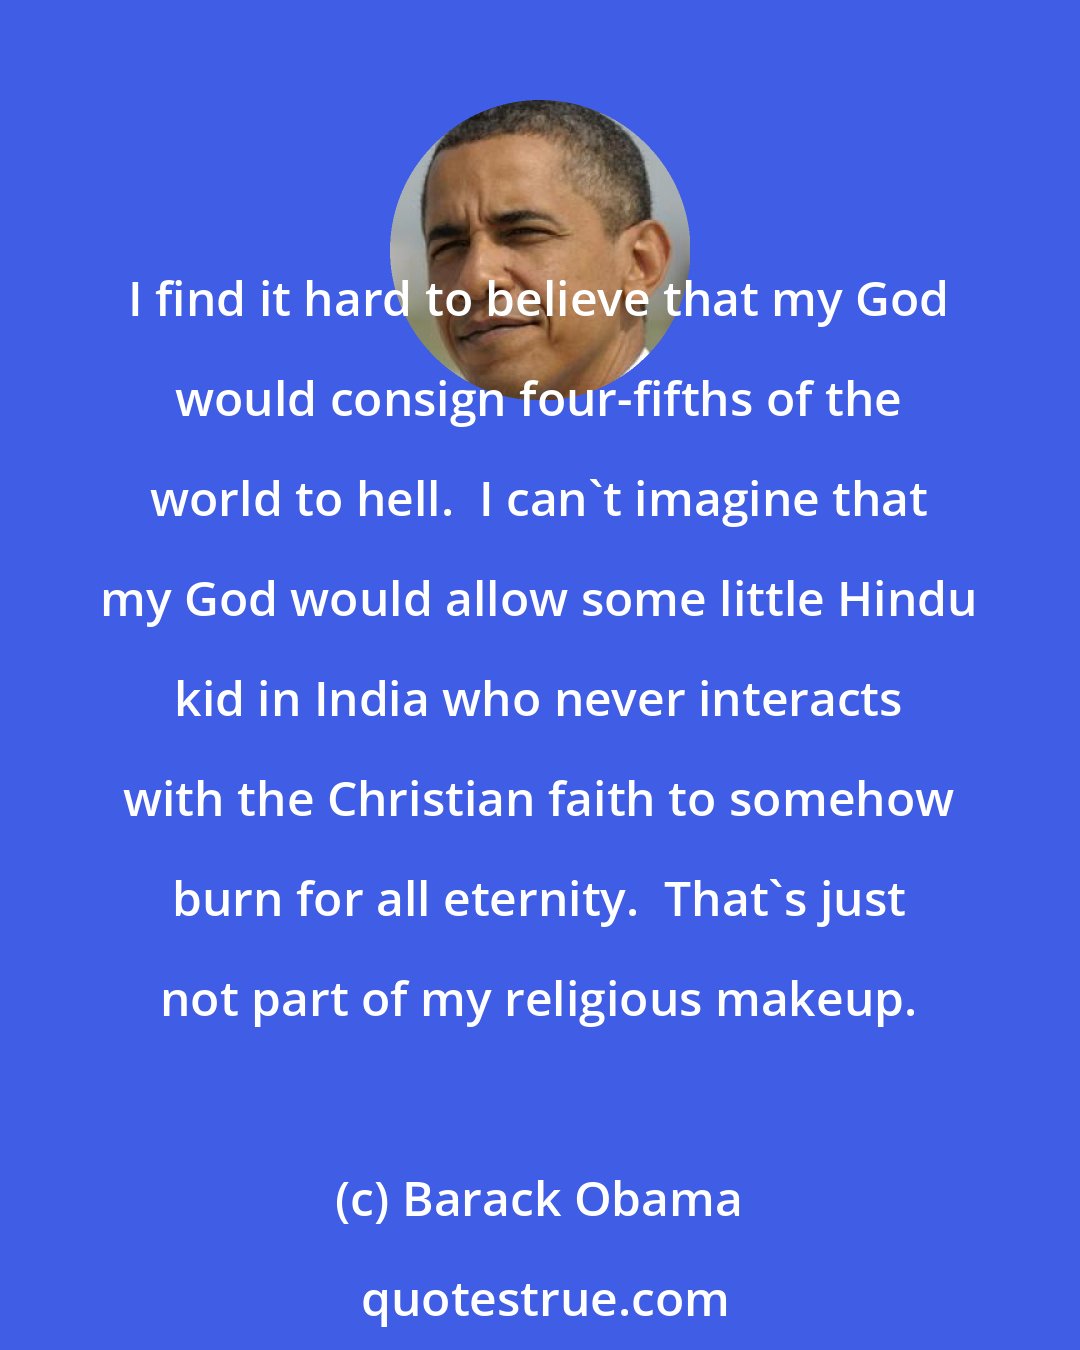 Barack Obama: I find it hard to believe that my God would consign four-fifths of the world to hell.  I can't imagine that my God would allow some little Hindu kid in India who never interacts with the Christian faith to somehow burn for all eternity.  That's just not part of my religious makeup.